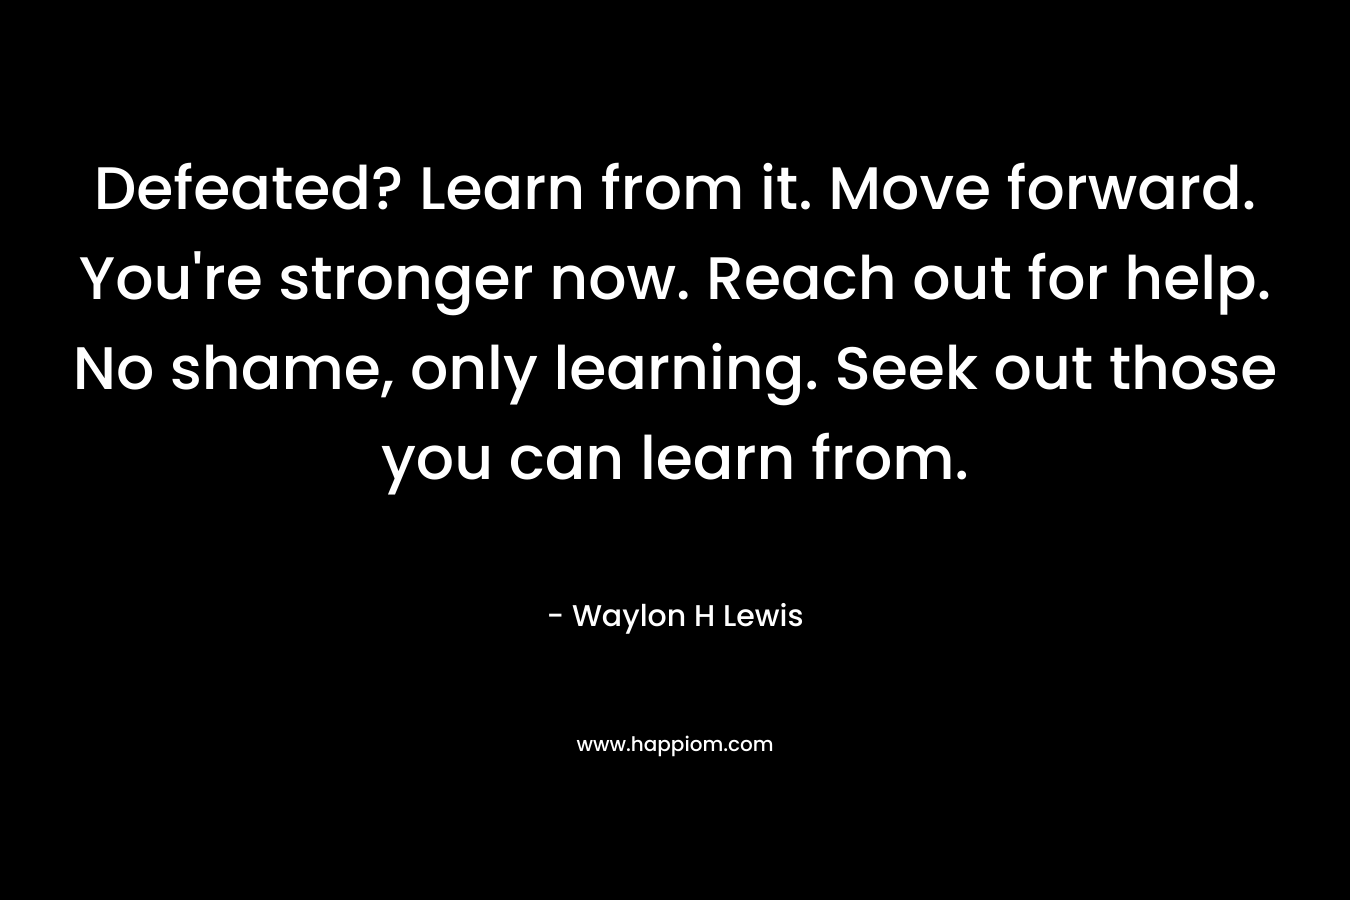 Defeated? Learn from it. Move forward. You're stronger now. Reach out for help. No shame, only learning. Seek out those you can learn from.